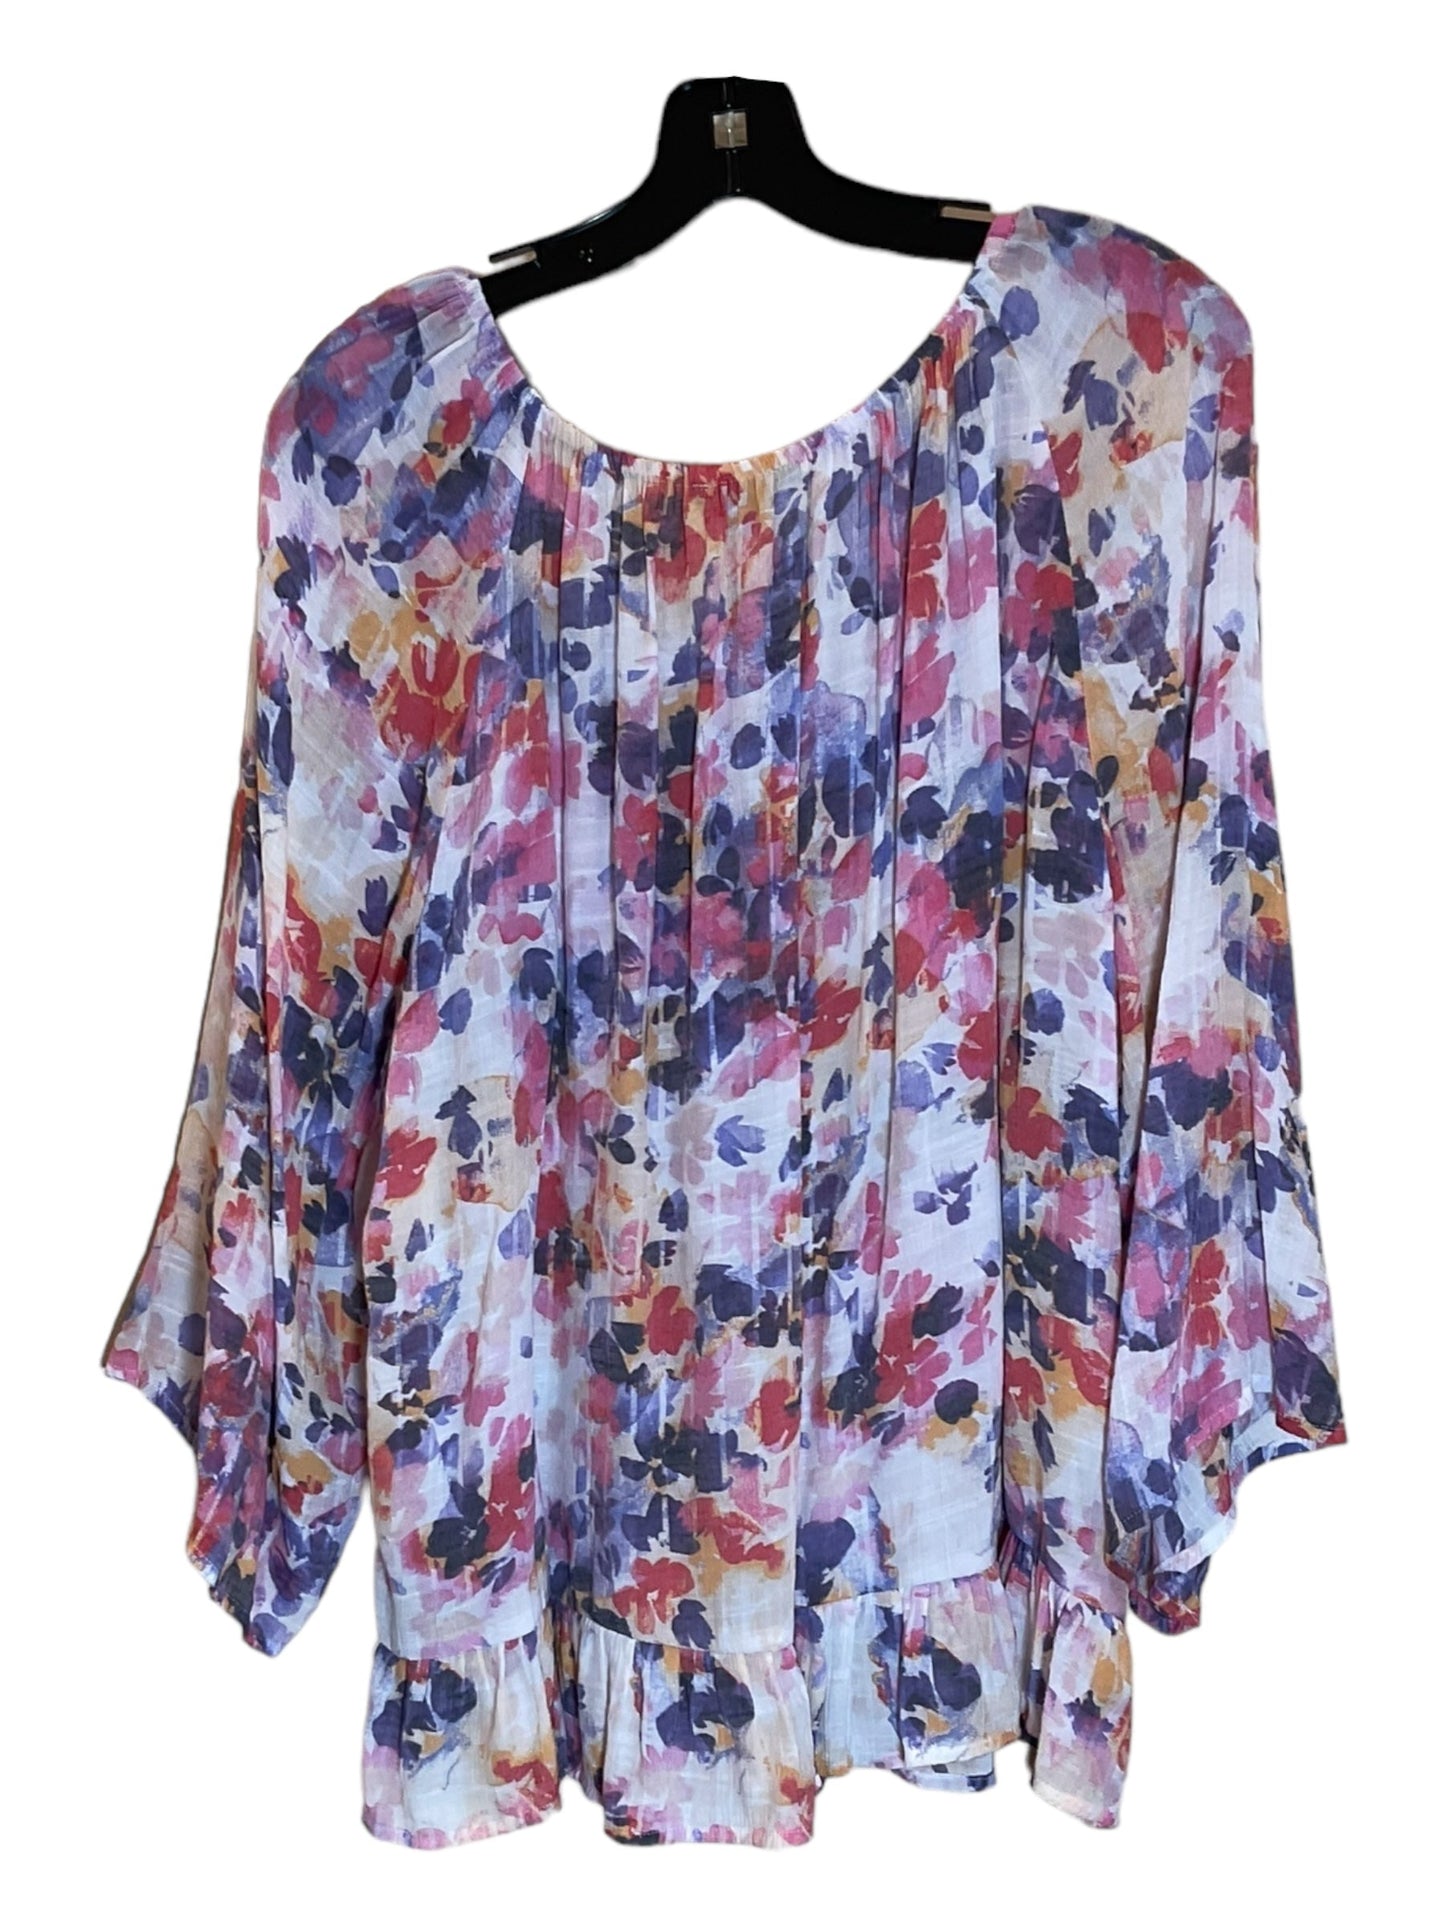 Floral Print Top Long Sleeve Zac And Rachel, Size 1x